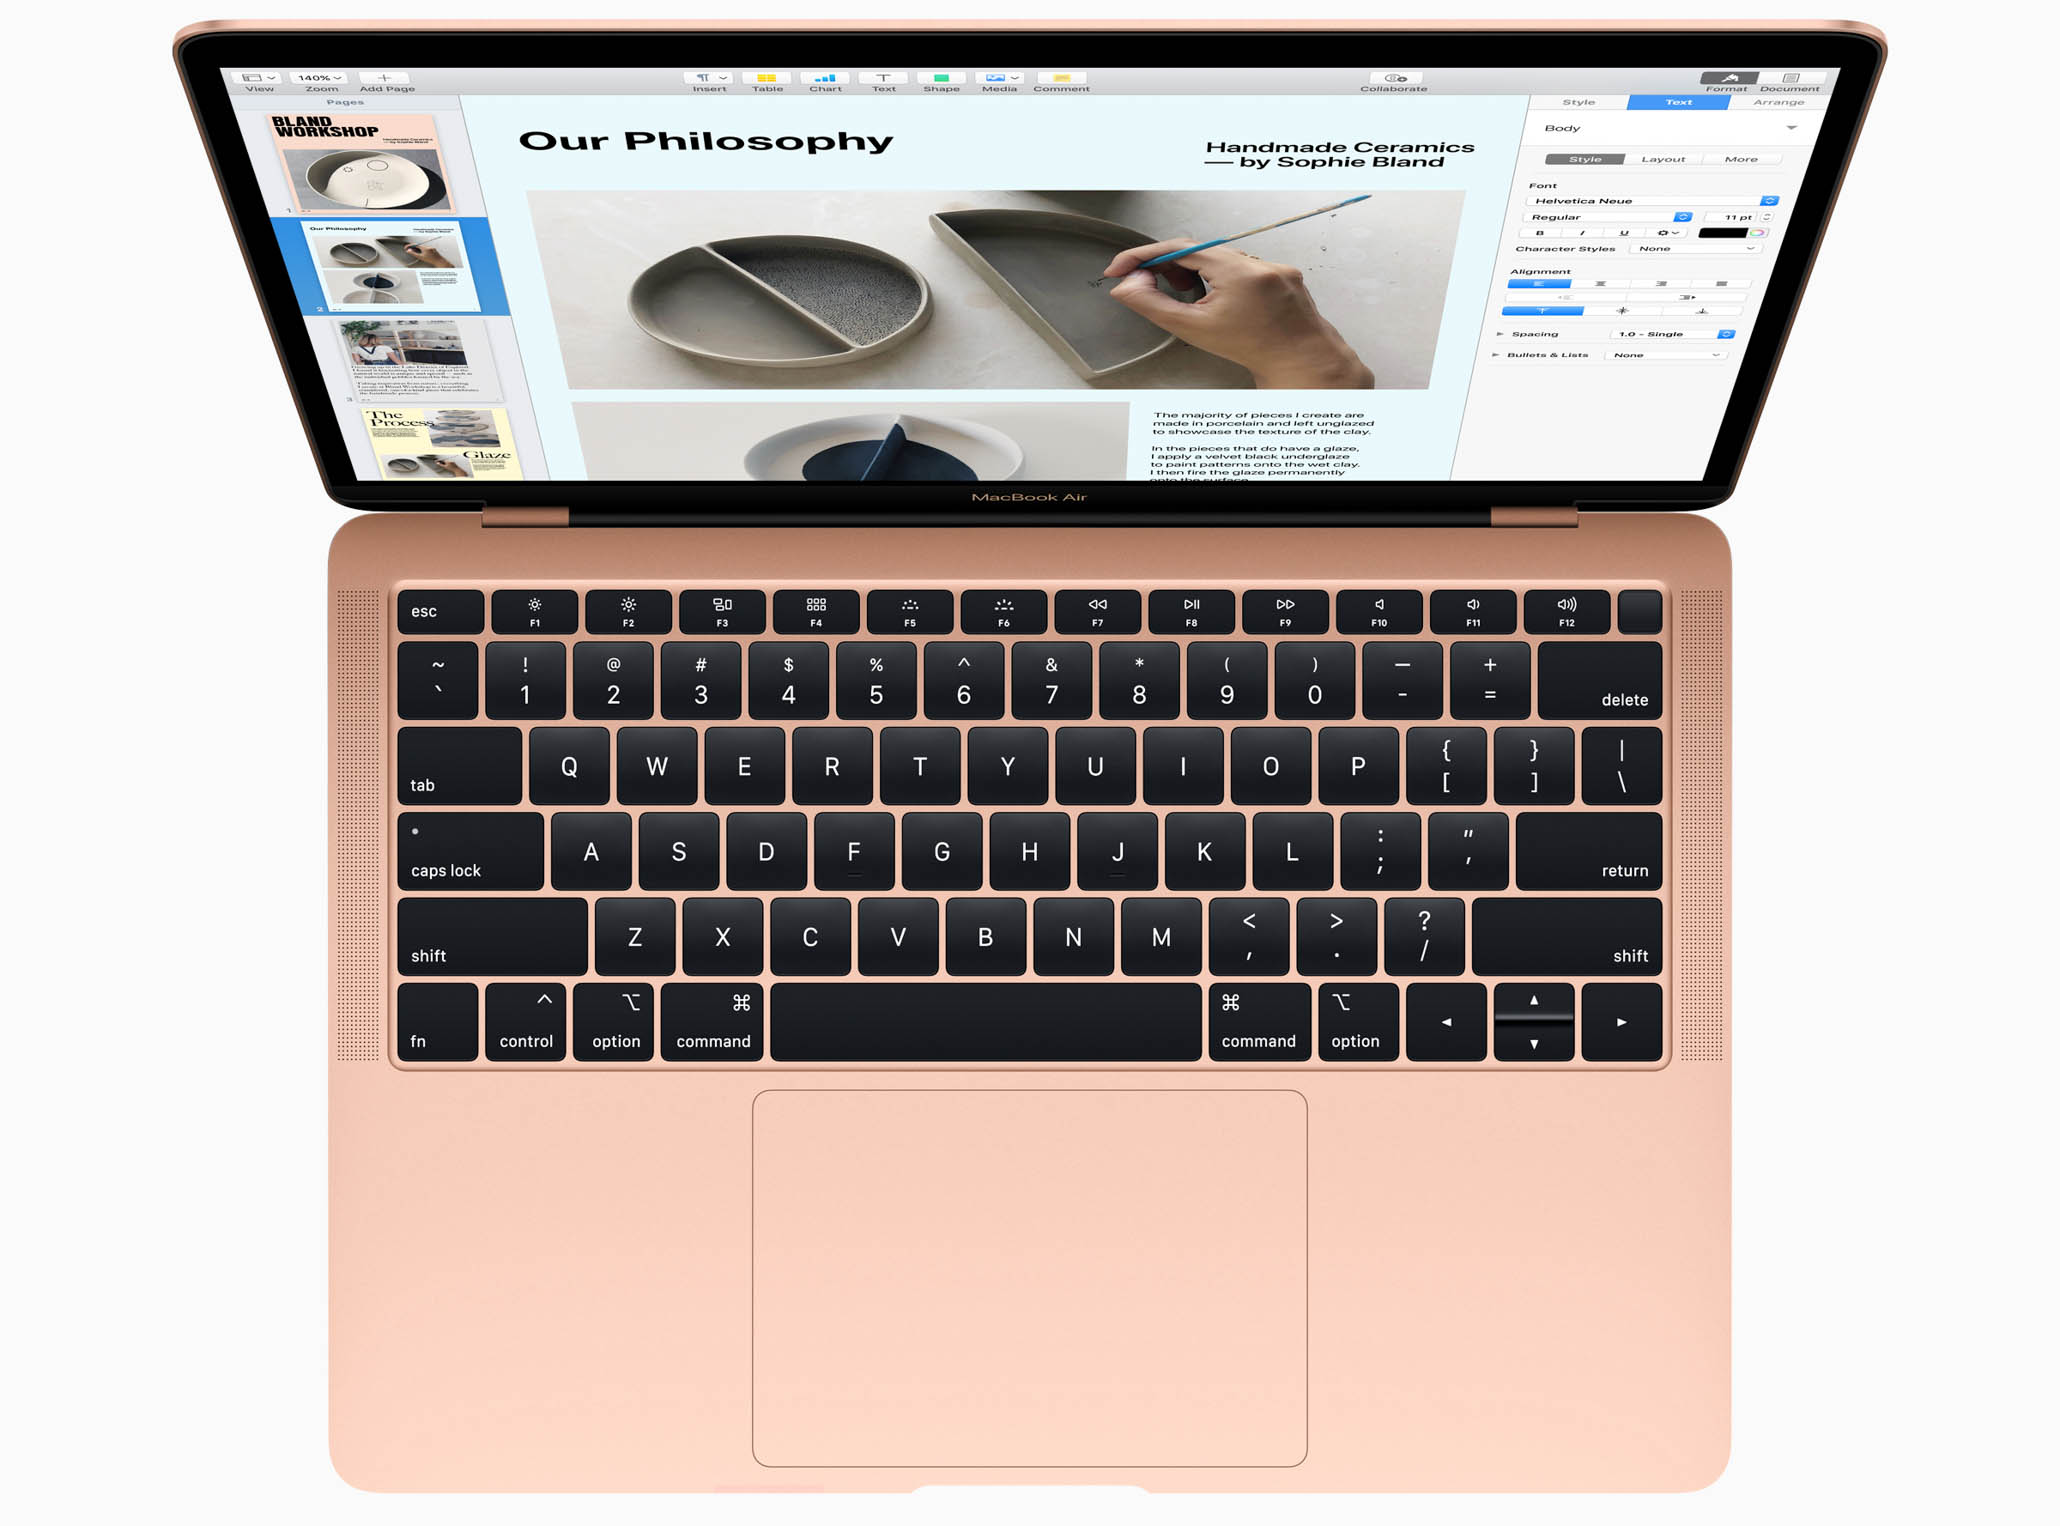 Where is Touch ID? It's the button on the upper right-hand corner of the keyboard. Image: Apple.